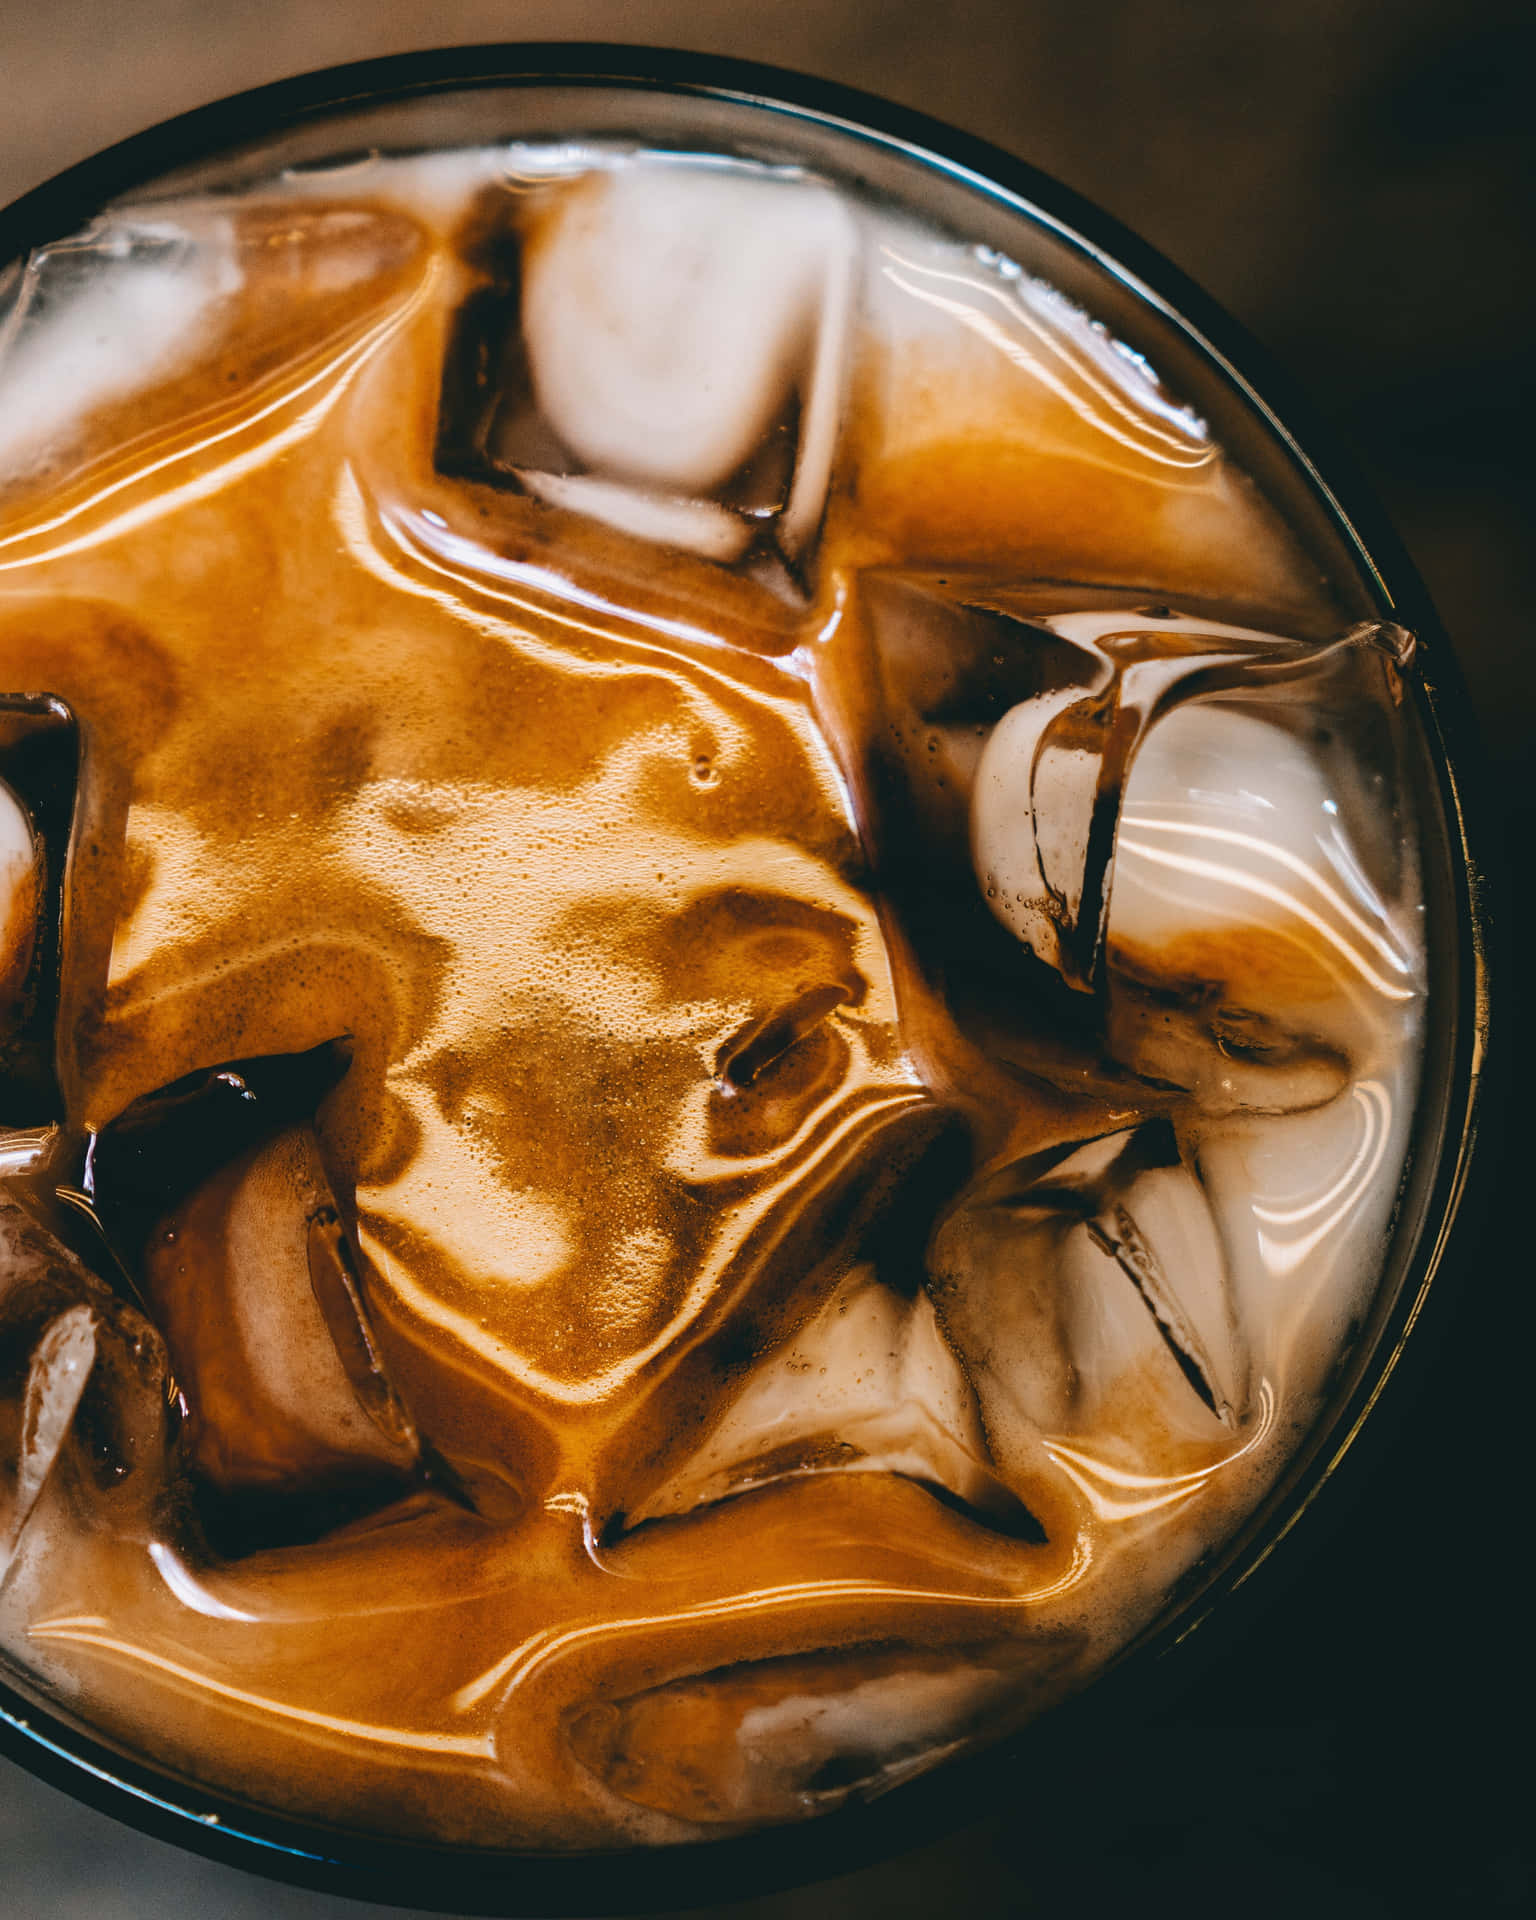 A Close Up Of A Cup Of Coffee With Ice